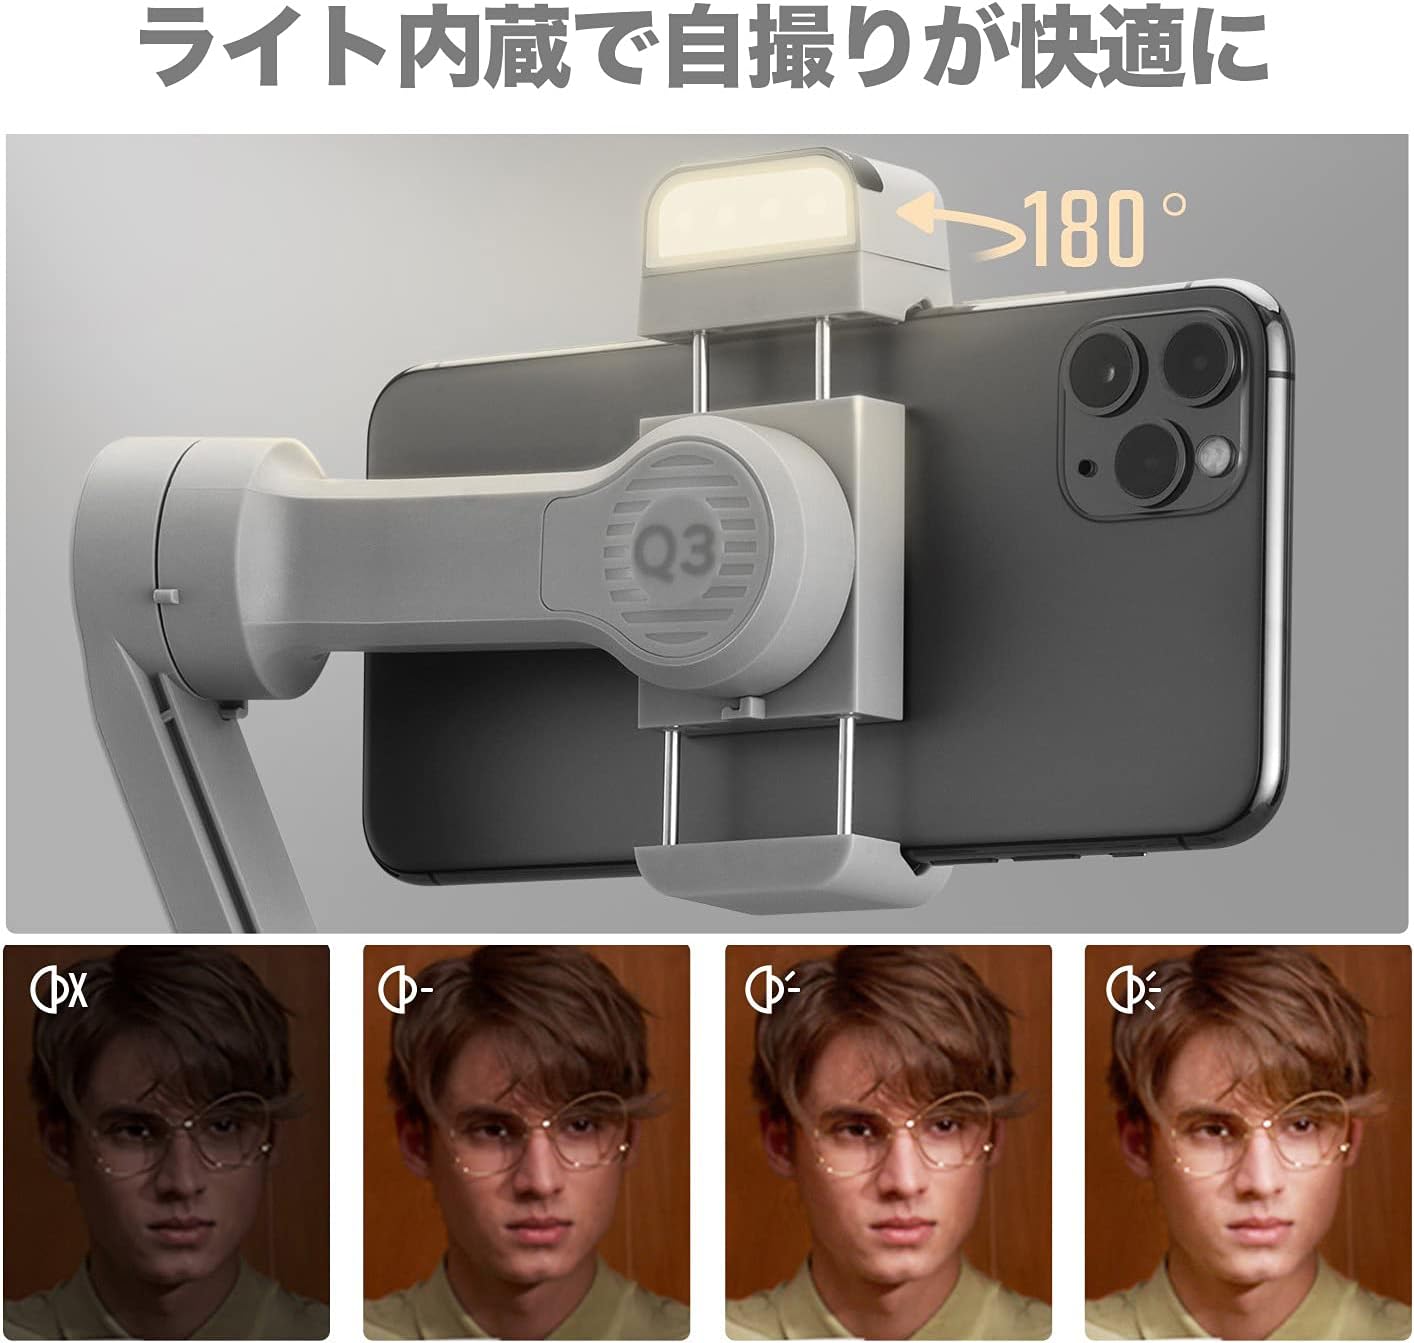 Zhiyun Smooth-Q3 Smartphone 3-Axis Gimbal Stabilizer - Supports landscape and portrait modes with gesture control. 6970194086521